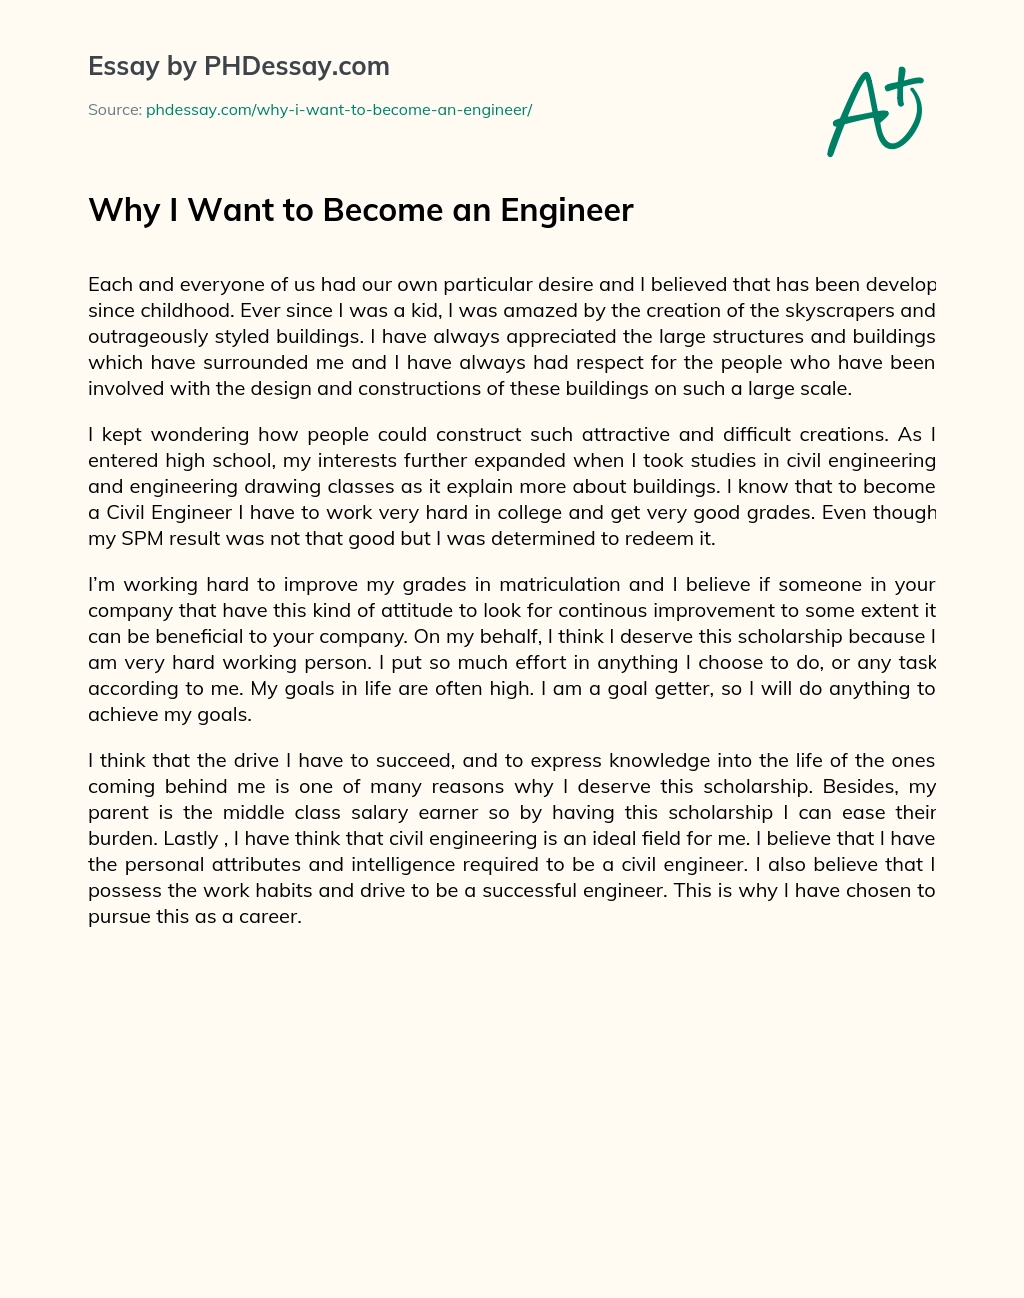 Why I Want to Become an Engineer essay